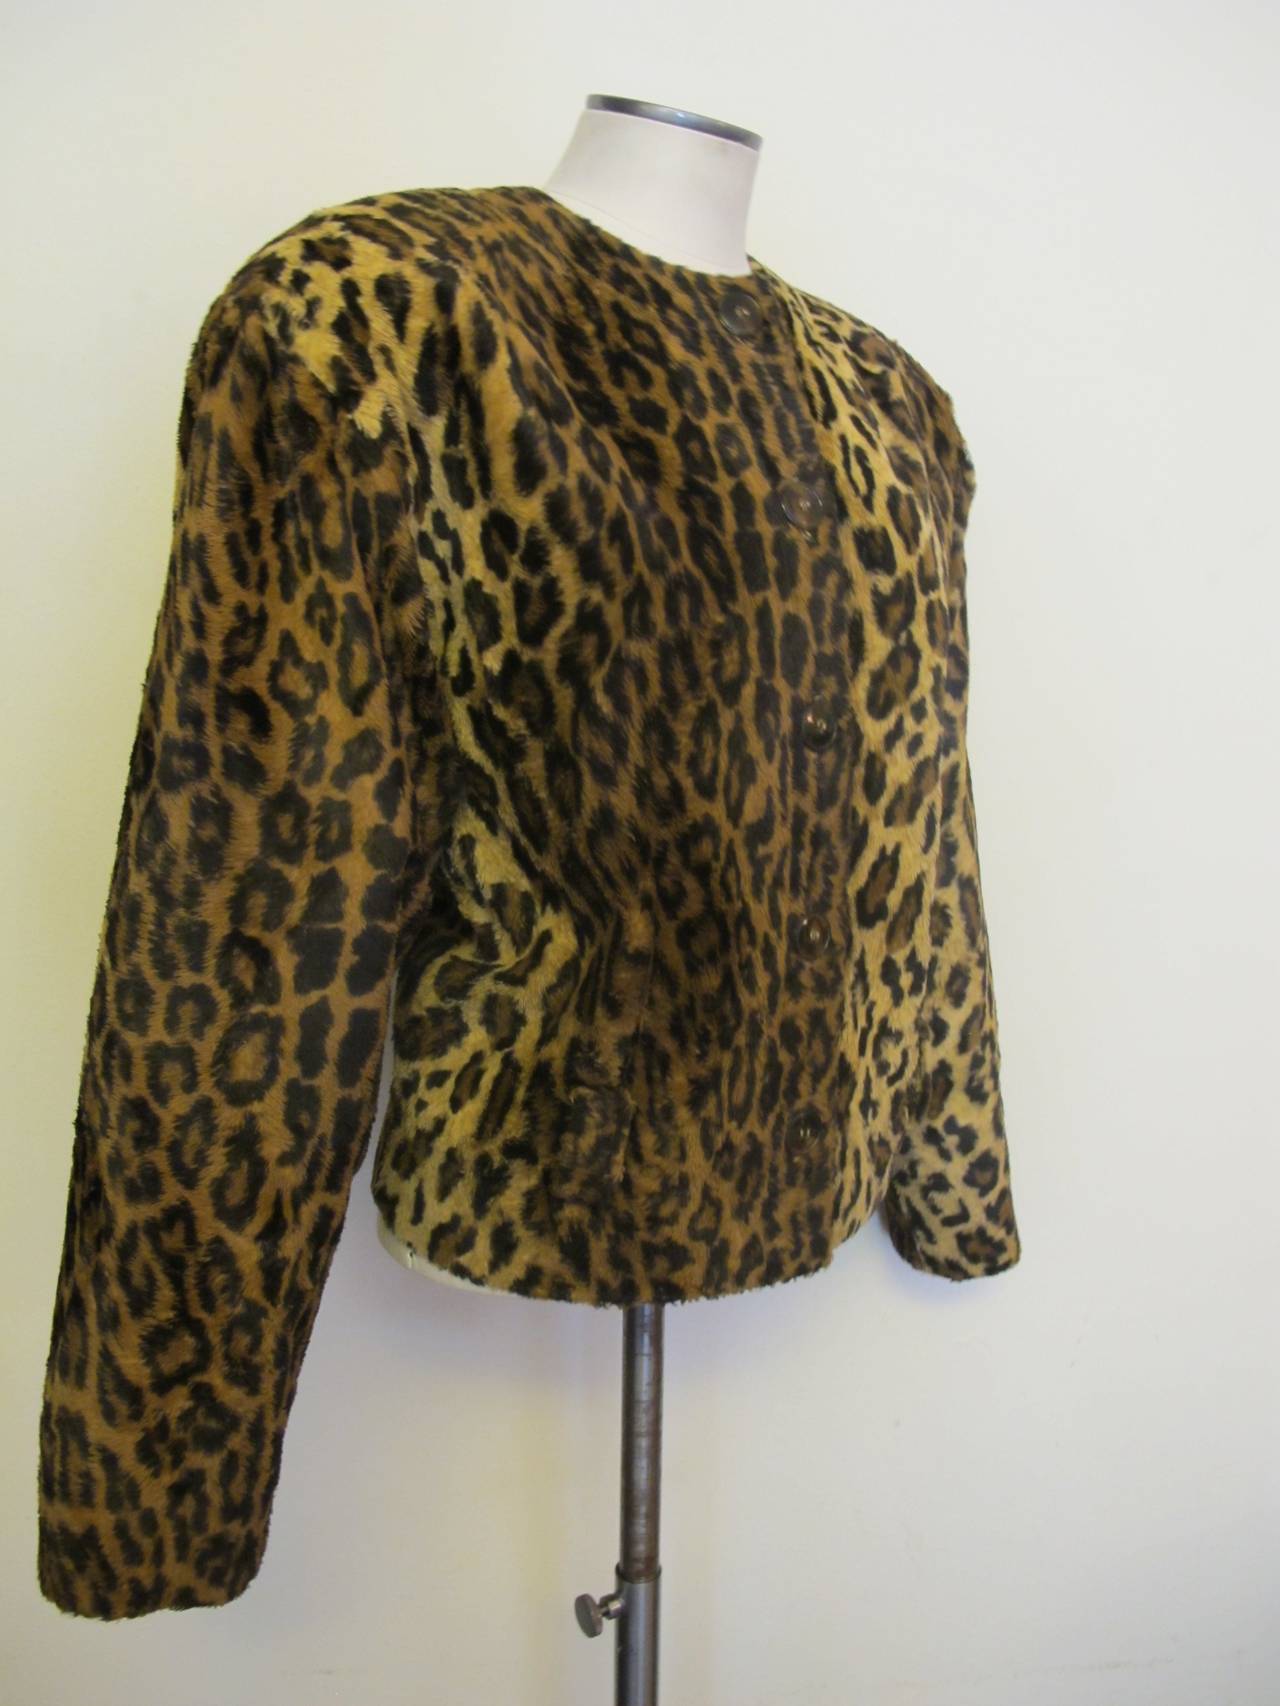 Bill Blass created his line Blassport in 1972. This leopard jacket is an iconic piece from the collection which was coveted by many women.  Some women found it affordable. There are 5 buttons, two pockets and belt loops. Sleeve length 21 inches.